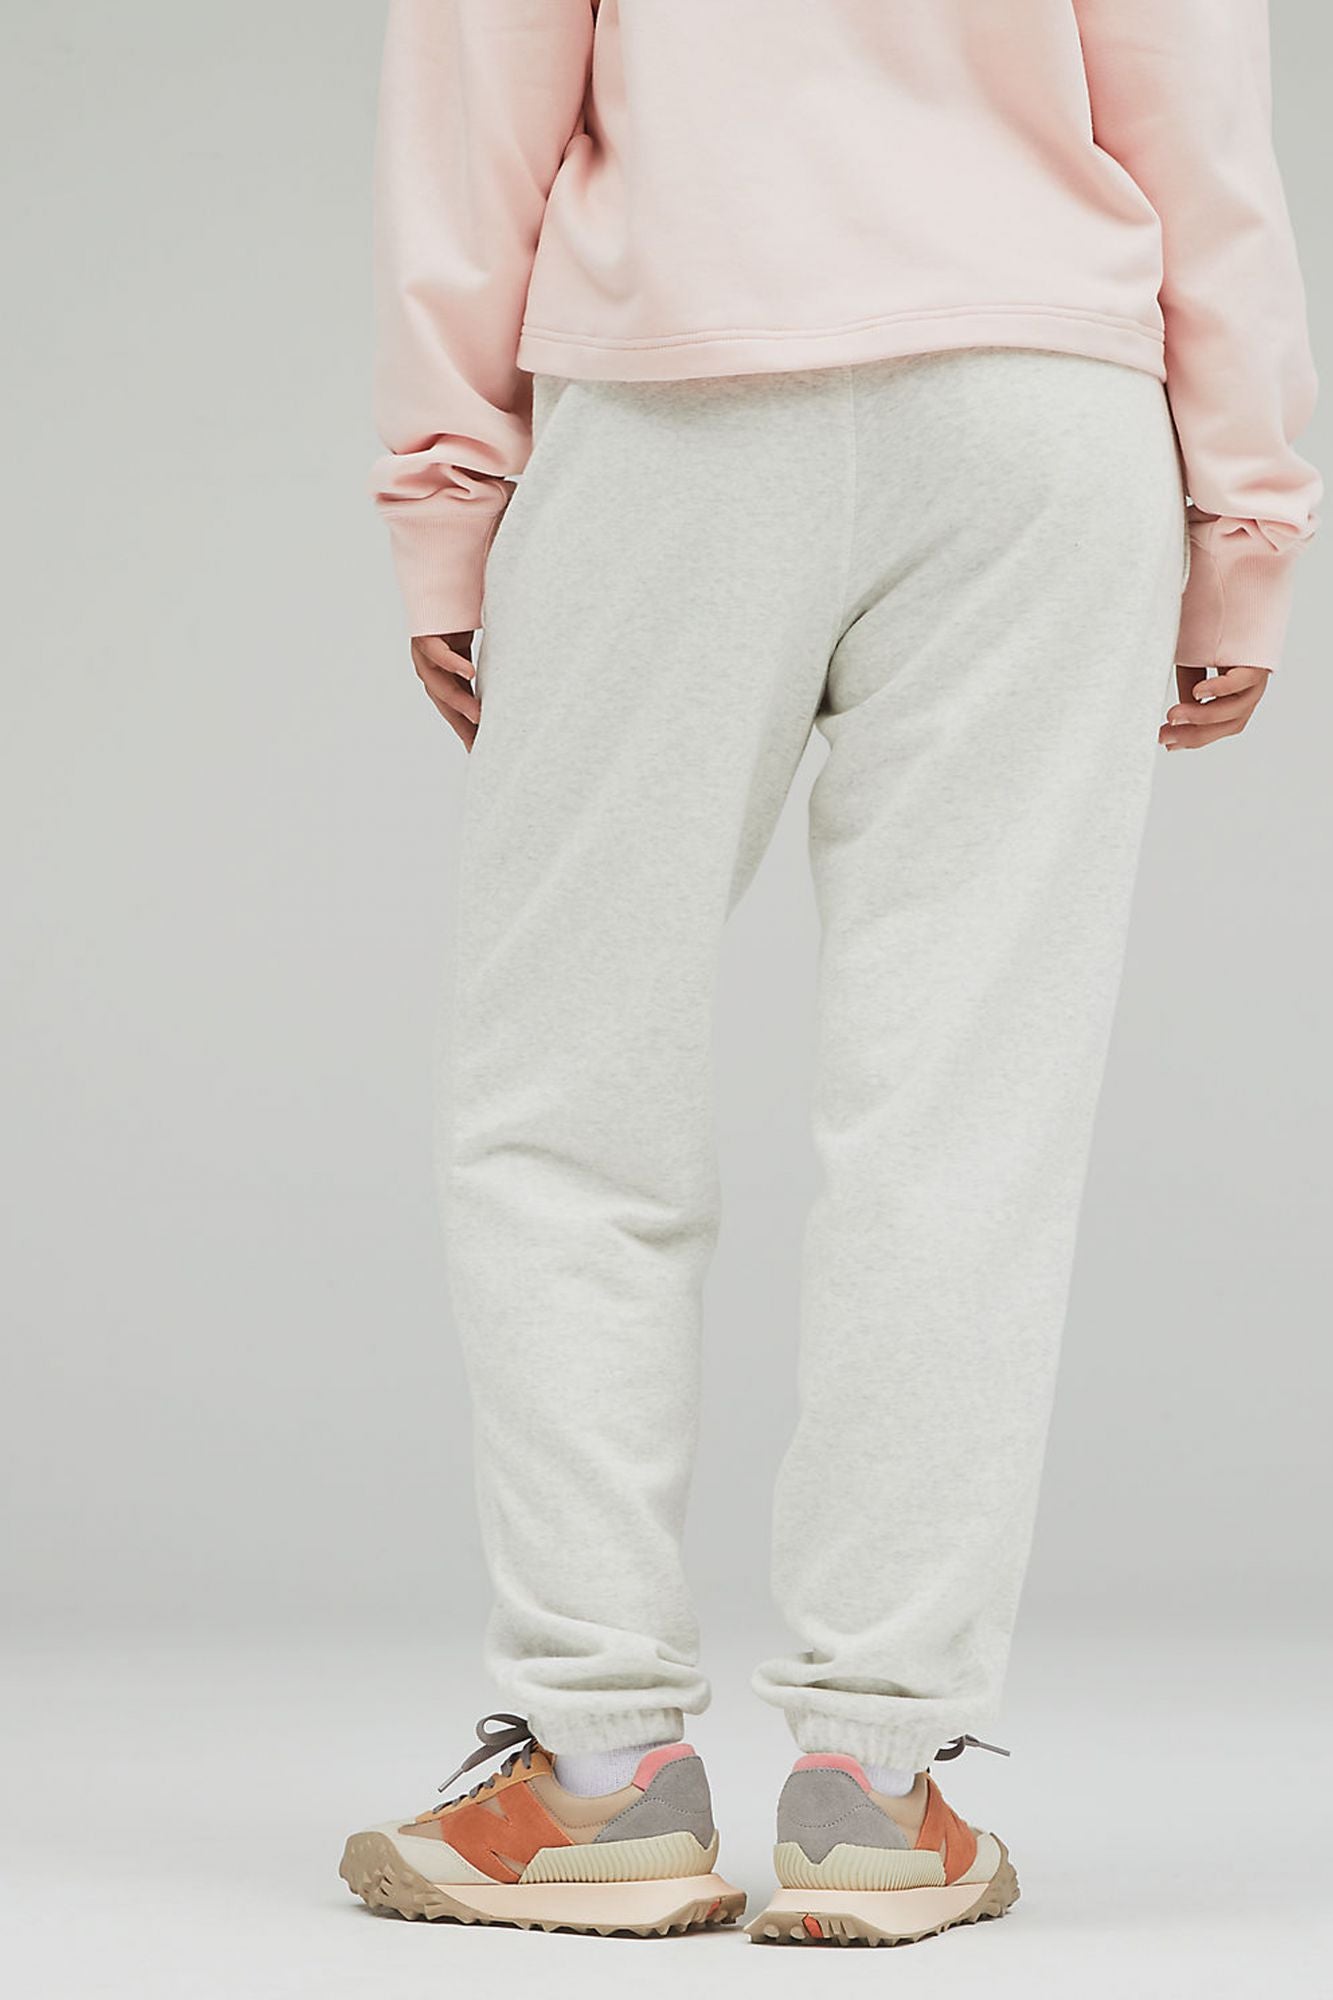 NEW BALANCE UNI-SSENTIALS FRENCH TERRY SWEATPANT en color BLANCO (3)